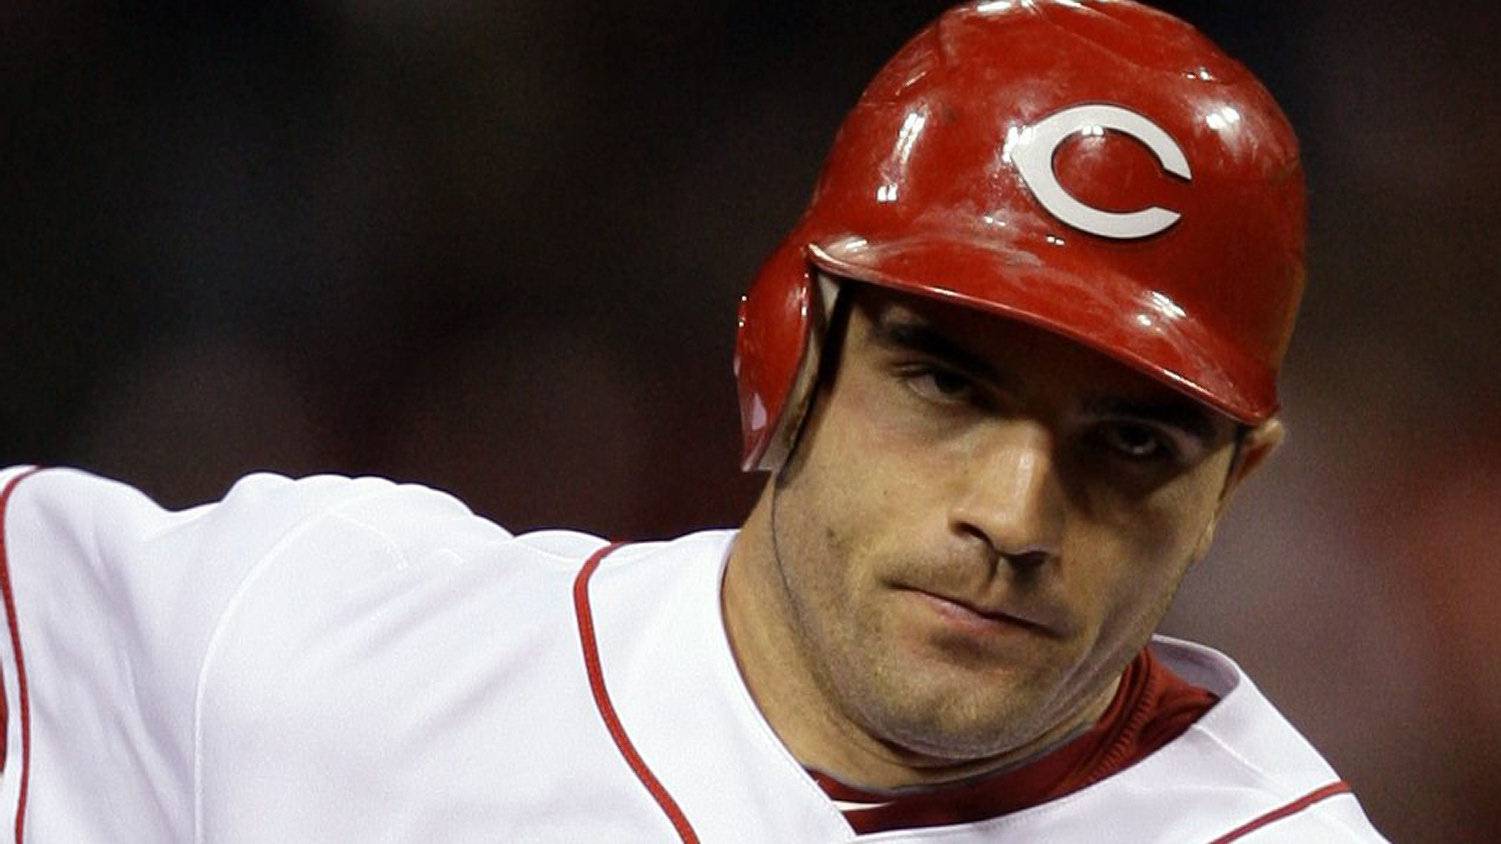 Joey Votto pleased with dominant July for Reds